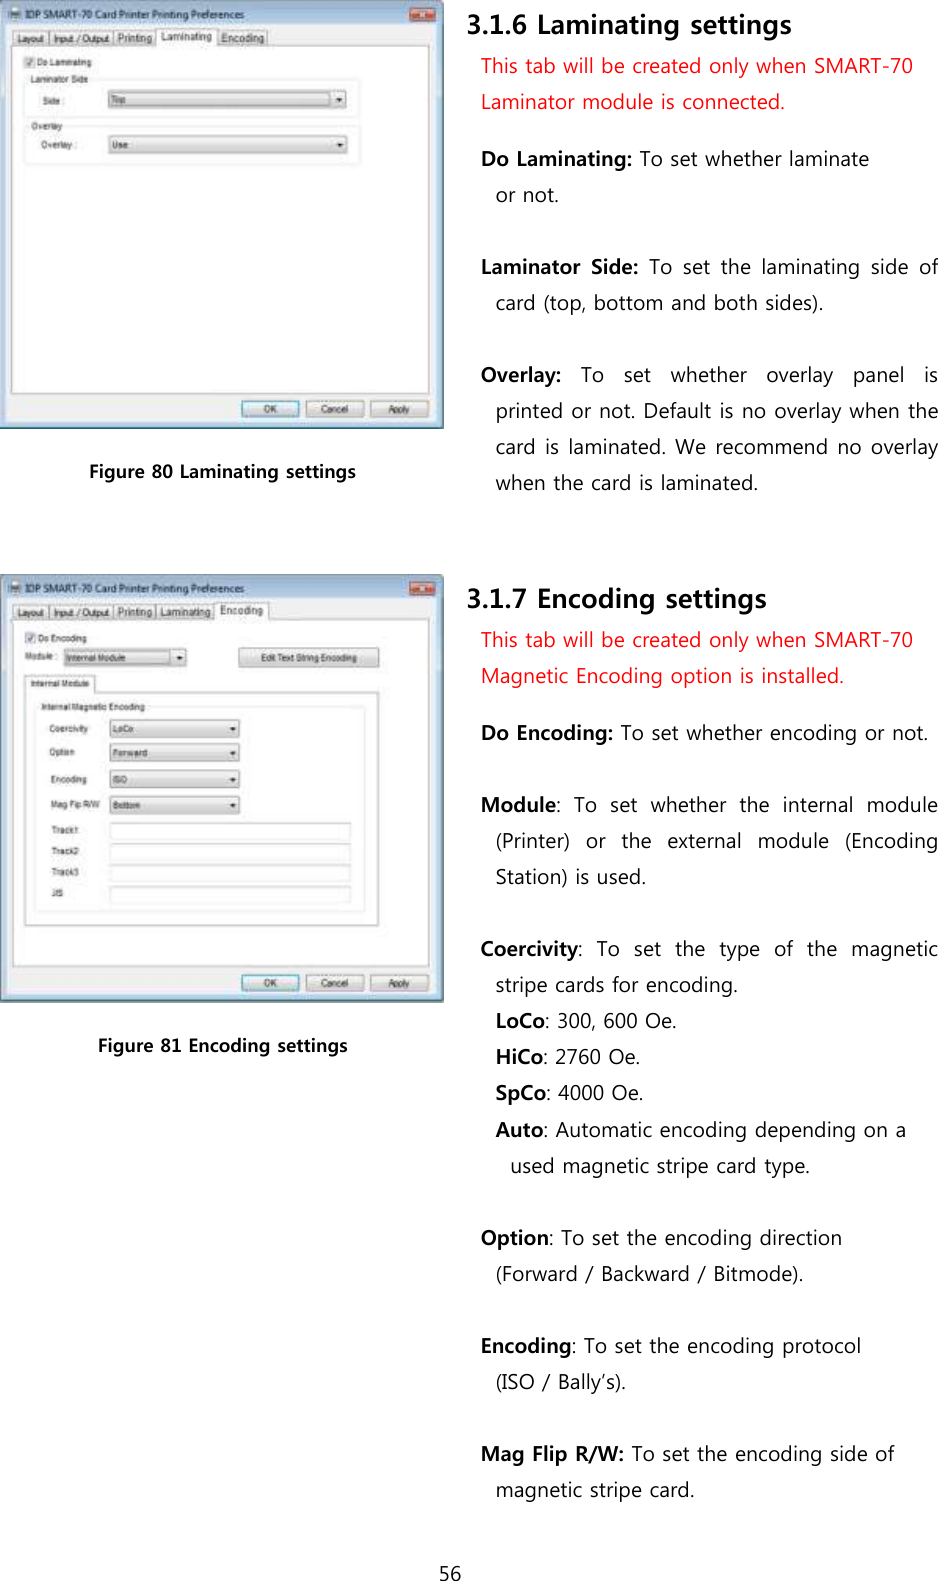 56   Figure 80 Laminating settings 3.1.6 Laminating settings This tab will be created only when SMART-70   Laminator module is connected. Do Laminating: To set whether laminate   or not.  Laminator  Side:  To  set the  laminating  side of card (top, bottom and both sides).    Overlay:  To  set  whether  overlay  panel  is printed or not. Default is no overlay when the card is laminated. We recommend no overlay when the card is laminated.     Figure 81 Encoding settings 3.1.7 Encoding settings This tab will be created only when SMART-70   Magnetic Encoding option is installed. Do Encoding: To set whether encoding or not.  Module:  To  set  whether  the  internal  module (Printer)  or  the  external  module  (Encoding Station) is used.  Coercivity:  To  set  the  type  of  the  magnetic stripe cards for encoding. LoCo: 300, 600 Oe. HiCo: 2760 Oe. SpCo: 4000 Oe. Auto: Automatic encoding depending on a   used magnetic stripe card type.  Option: To set the encoding direction   (Forward / Backward / Bitmode).  Encoding: To set the encoding protocol   (ISO / Bally’s).    Mag Flip R/W: To set the encoding side of   magnetic stripe card.  